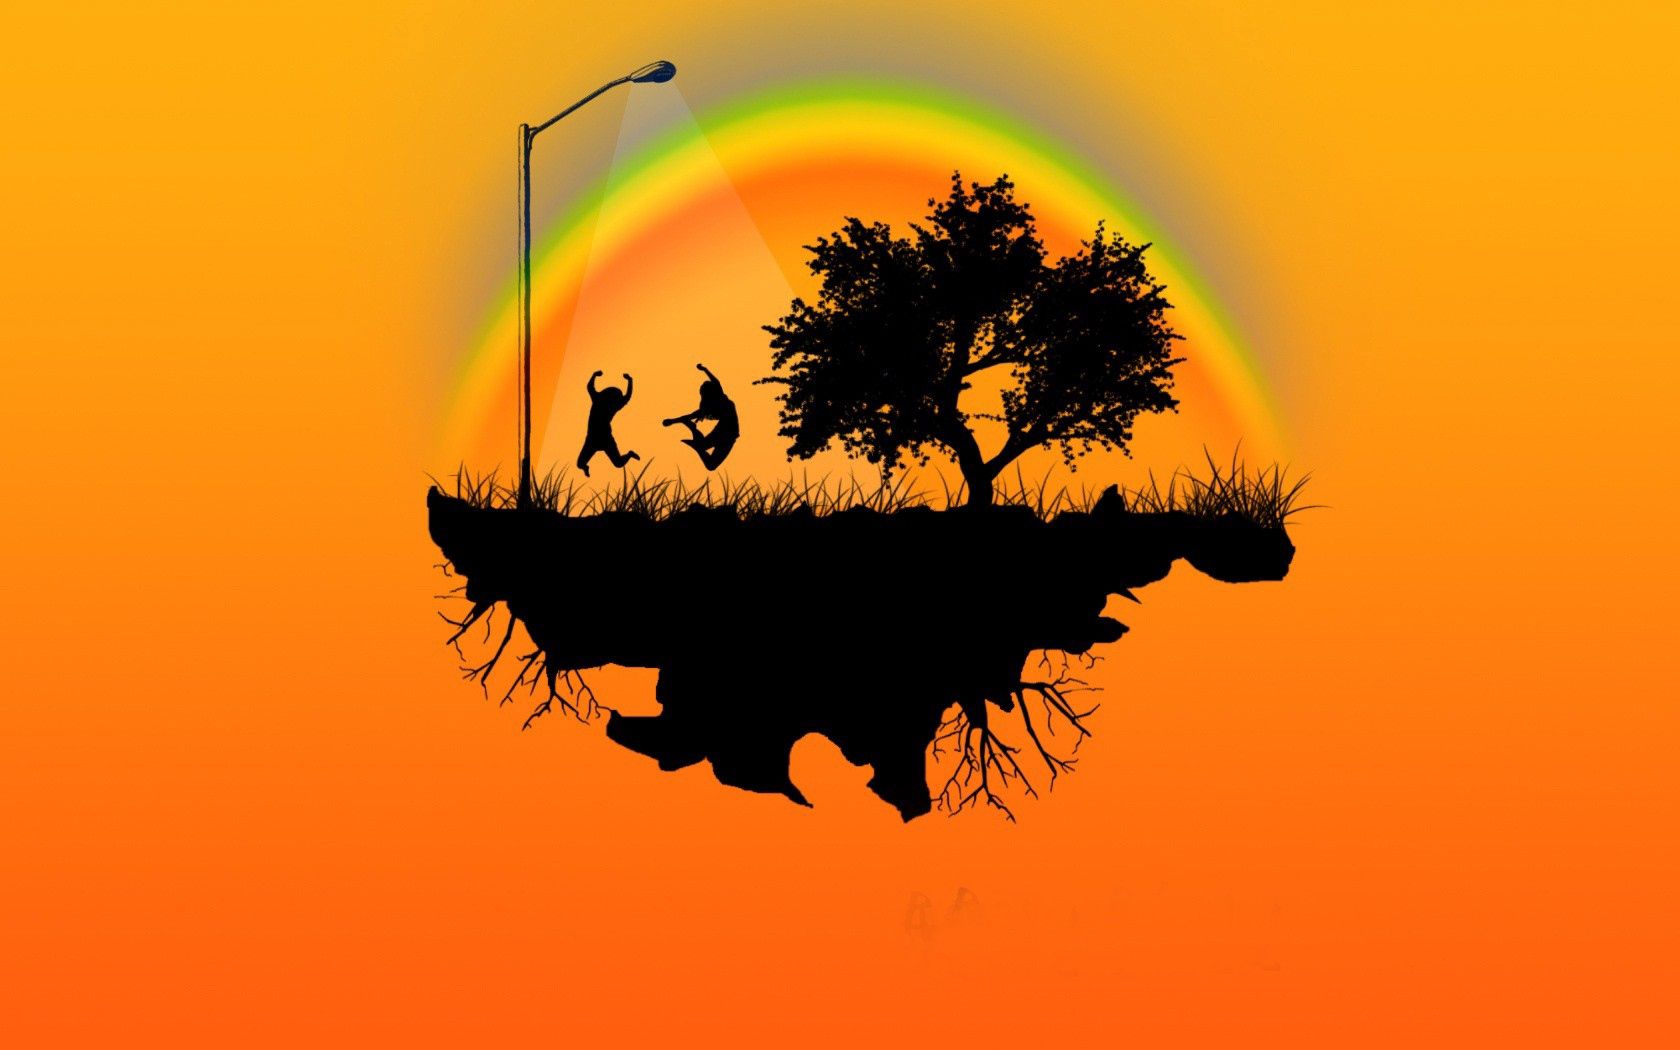 people, trees, vector, island, bounce, jump, emotions